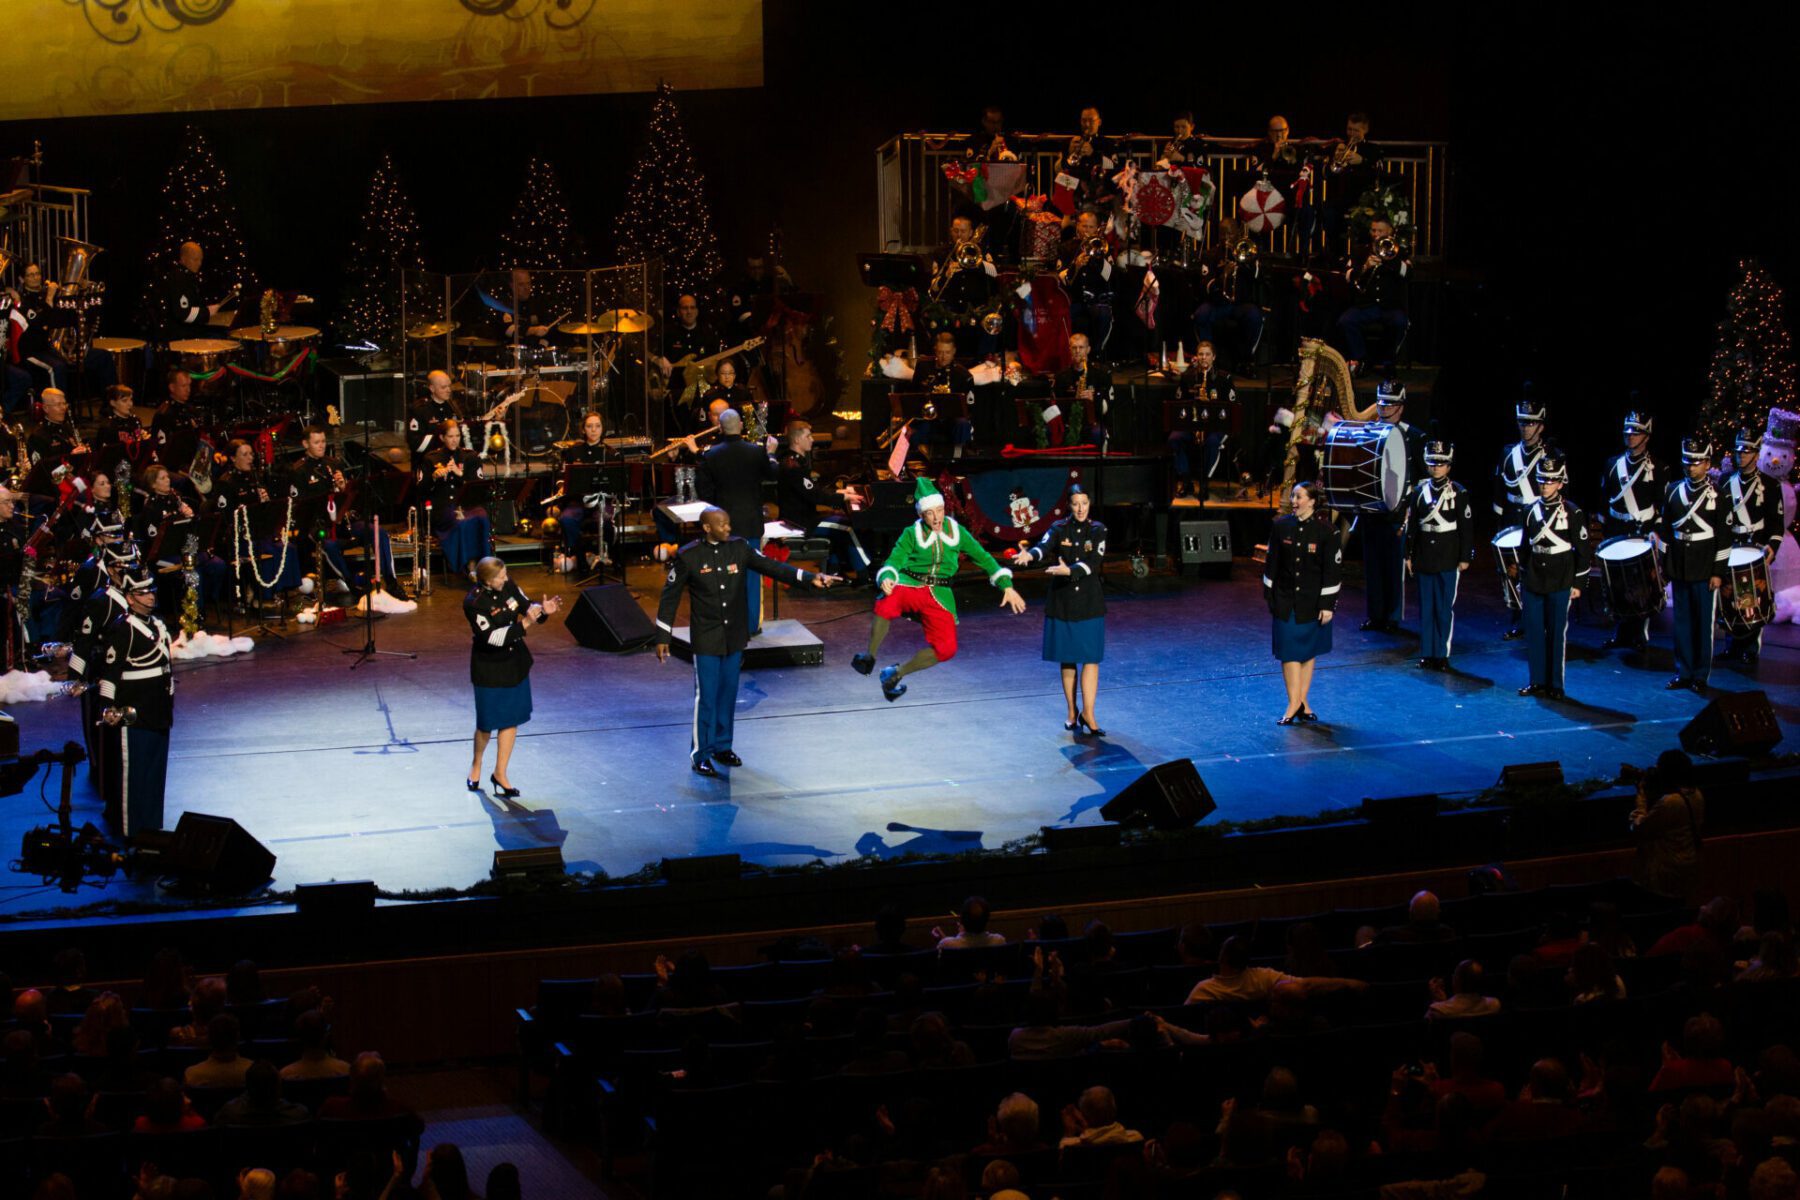 West Point Band Presents "A West Point Holiday"